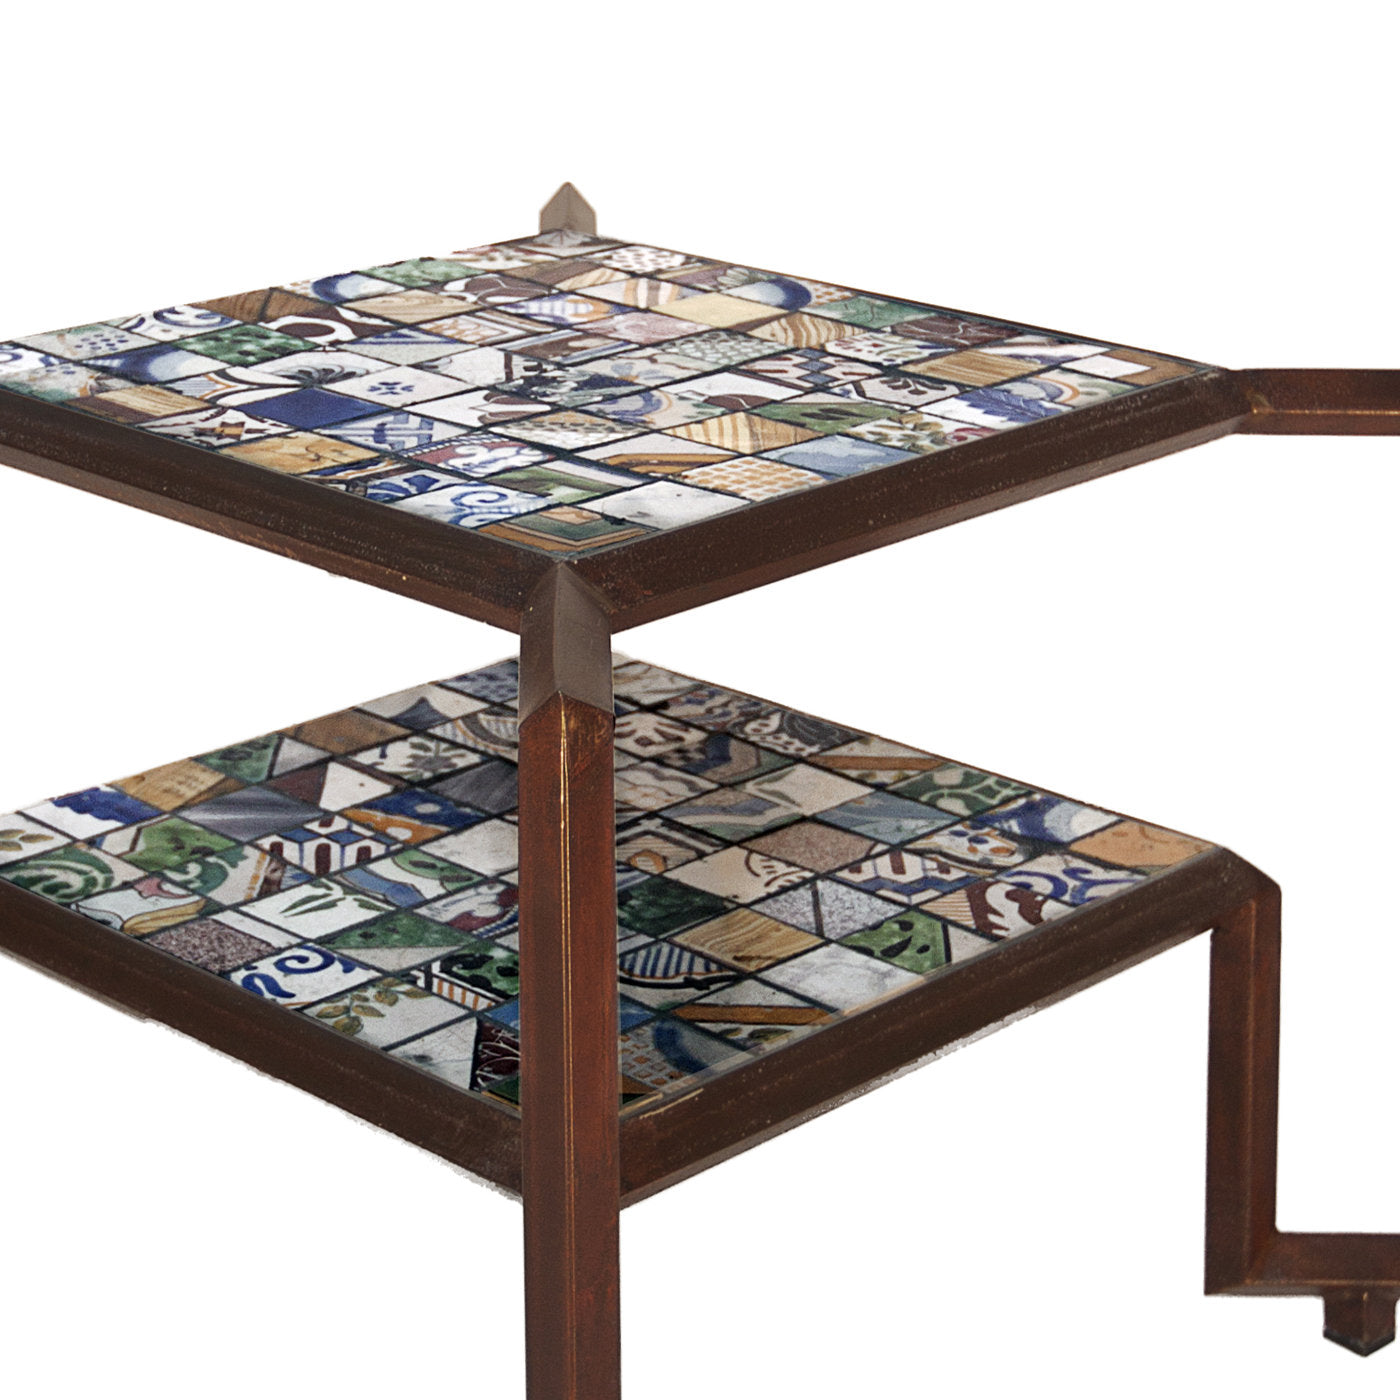 Spider Mosaic Tile Table - Alternative view 2